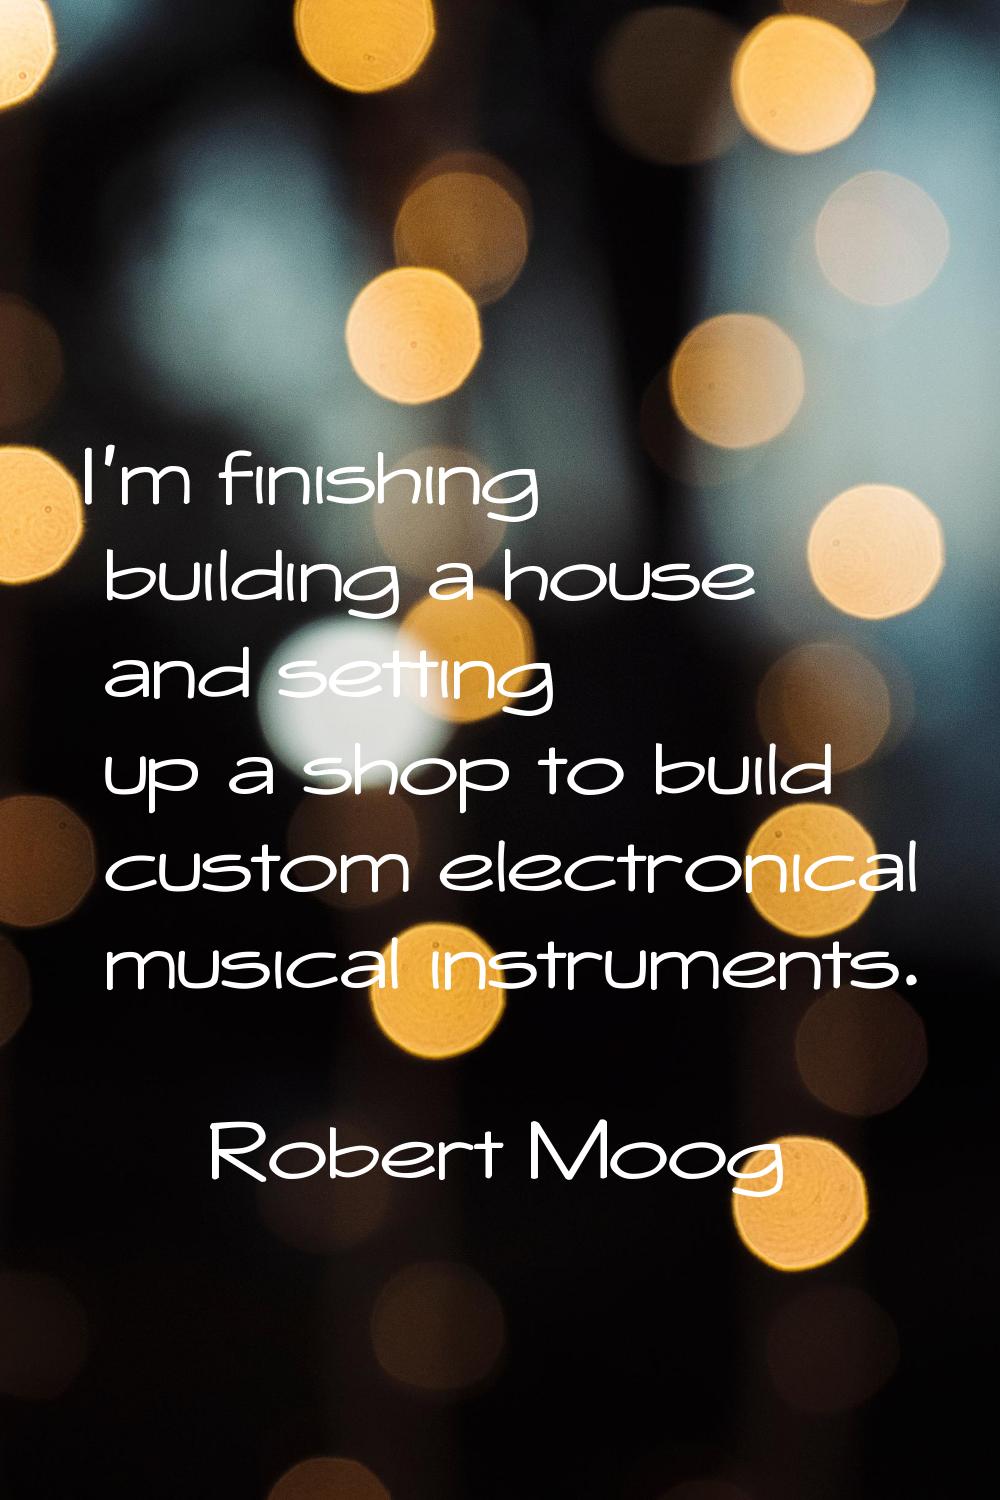 I'm finishing building a house and setting up a shop to build custom electronical musical instrumen